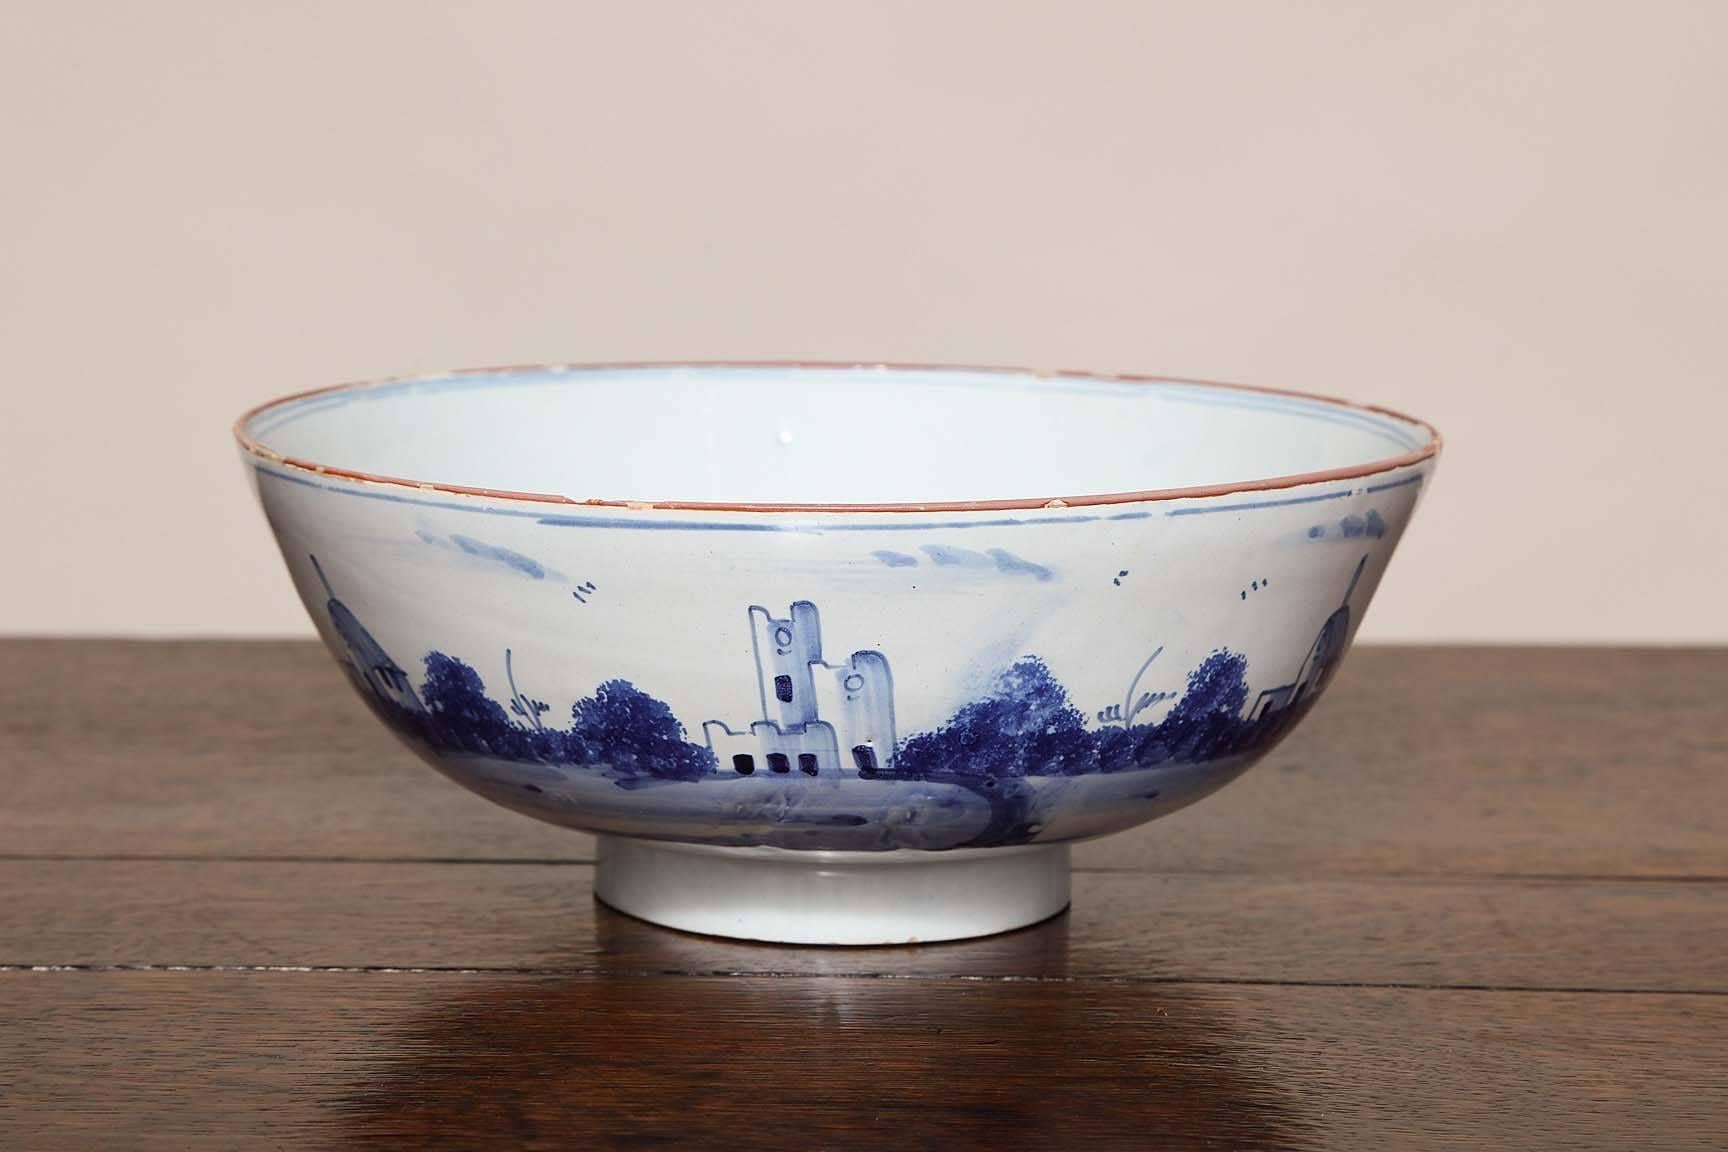 Fine 18th century delft punch bowl, the exterior with landscape scenes depicting cottages, castles and churches, the rim with orange glaze, the interior with simple white glaze with blur ring and in fine condition.

    